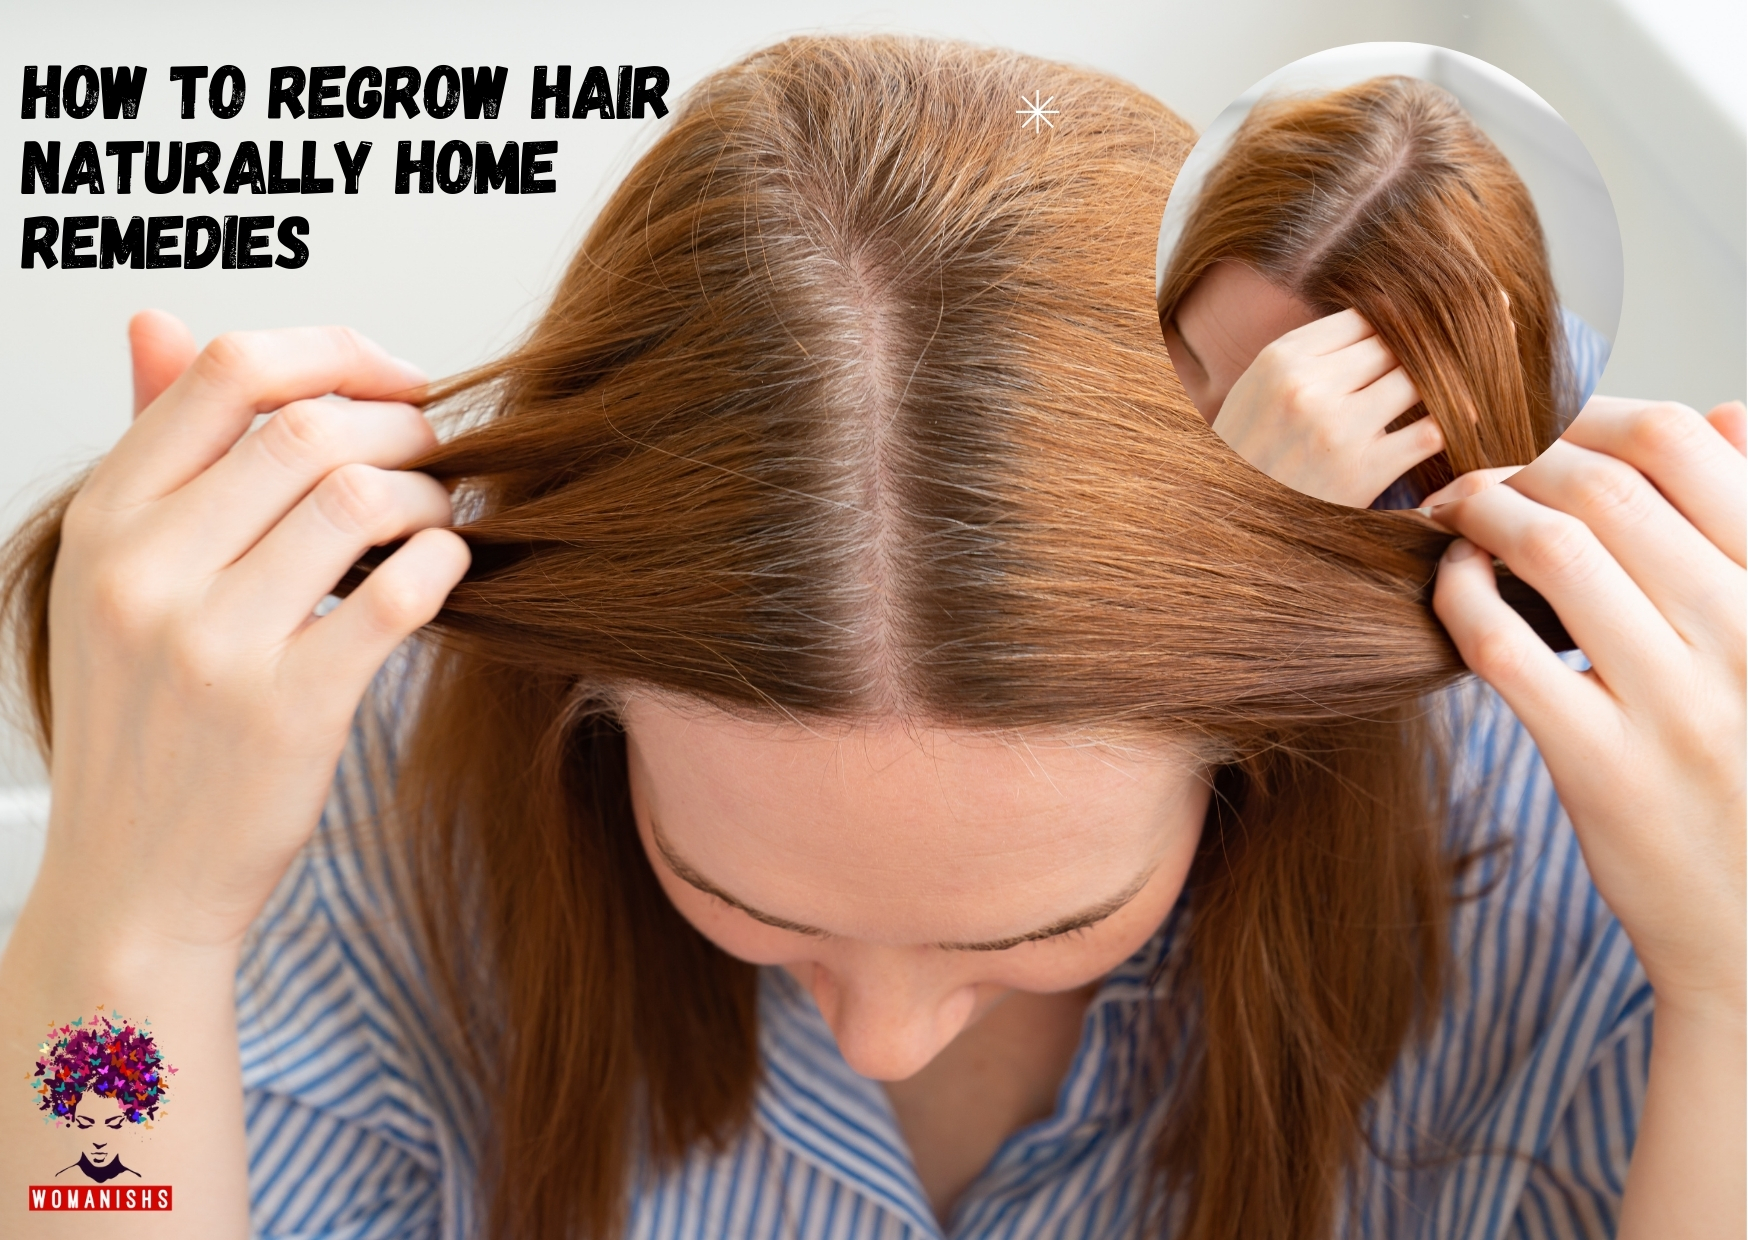 How to Regrow Hair Naturally Home Remedies